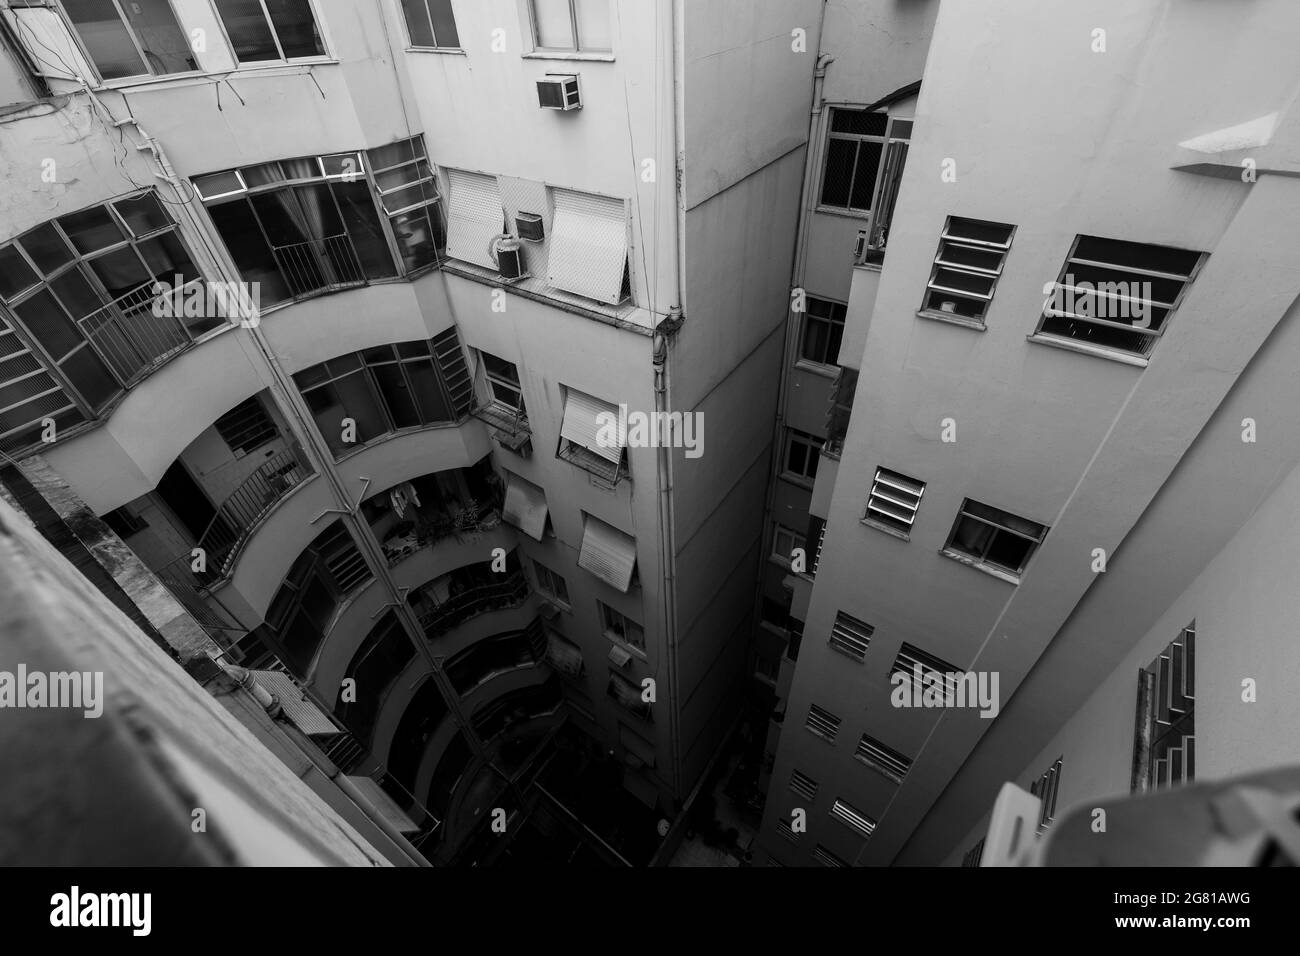 Grayscale shot of high-rise apartment buildings Stock Photo